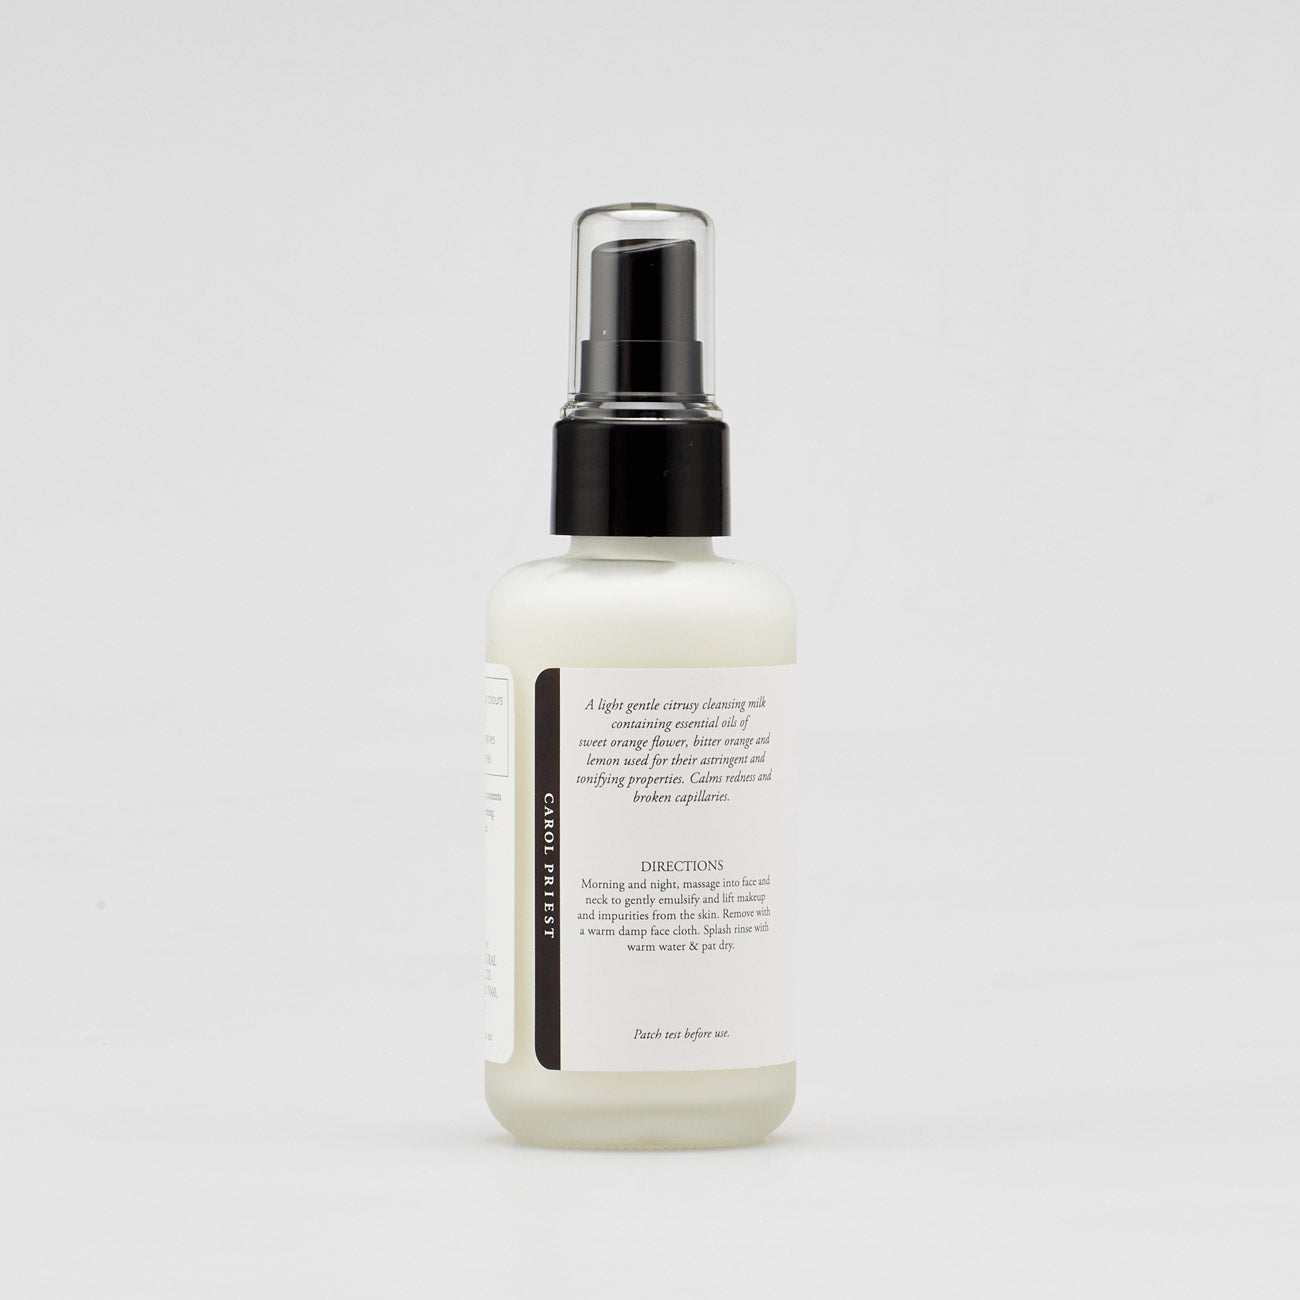 Orangeflower Cleansing Milk from Carol Priest's Neroli line, a natural and hydrating organic skincare cleanser.